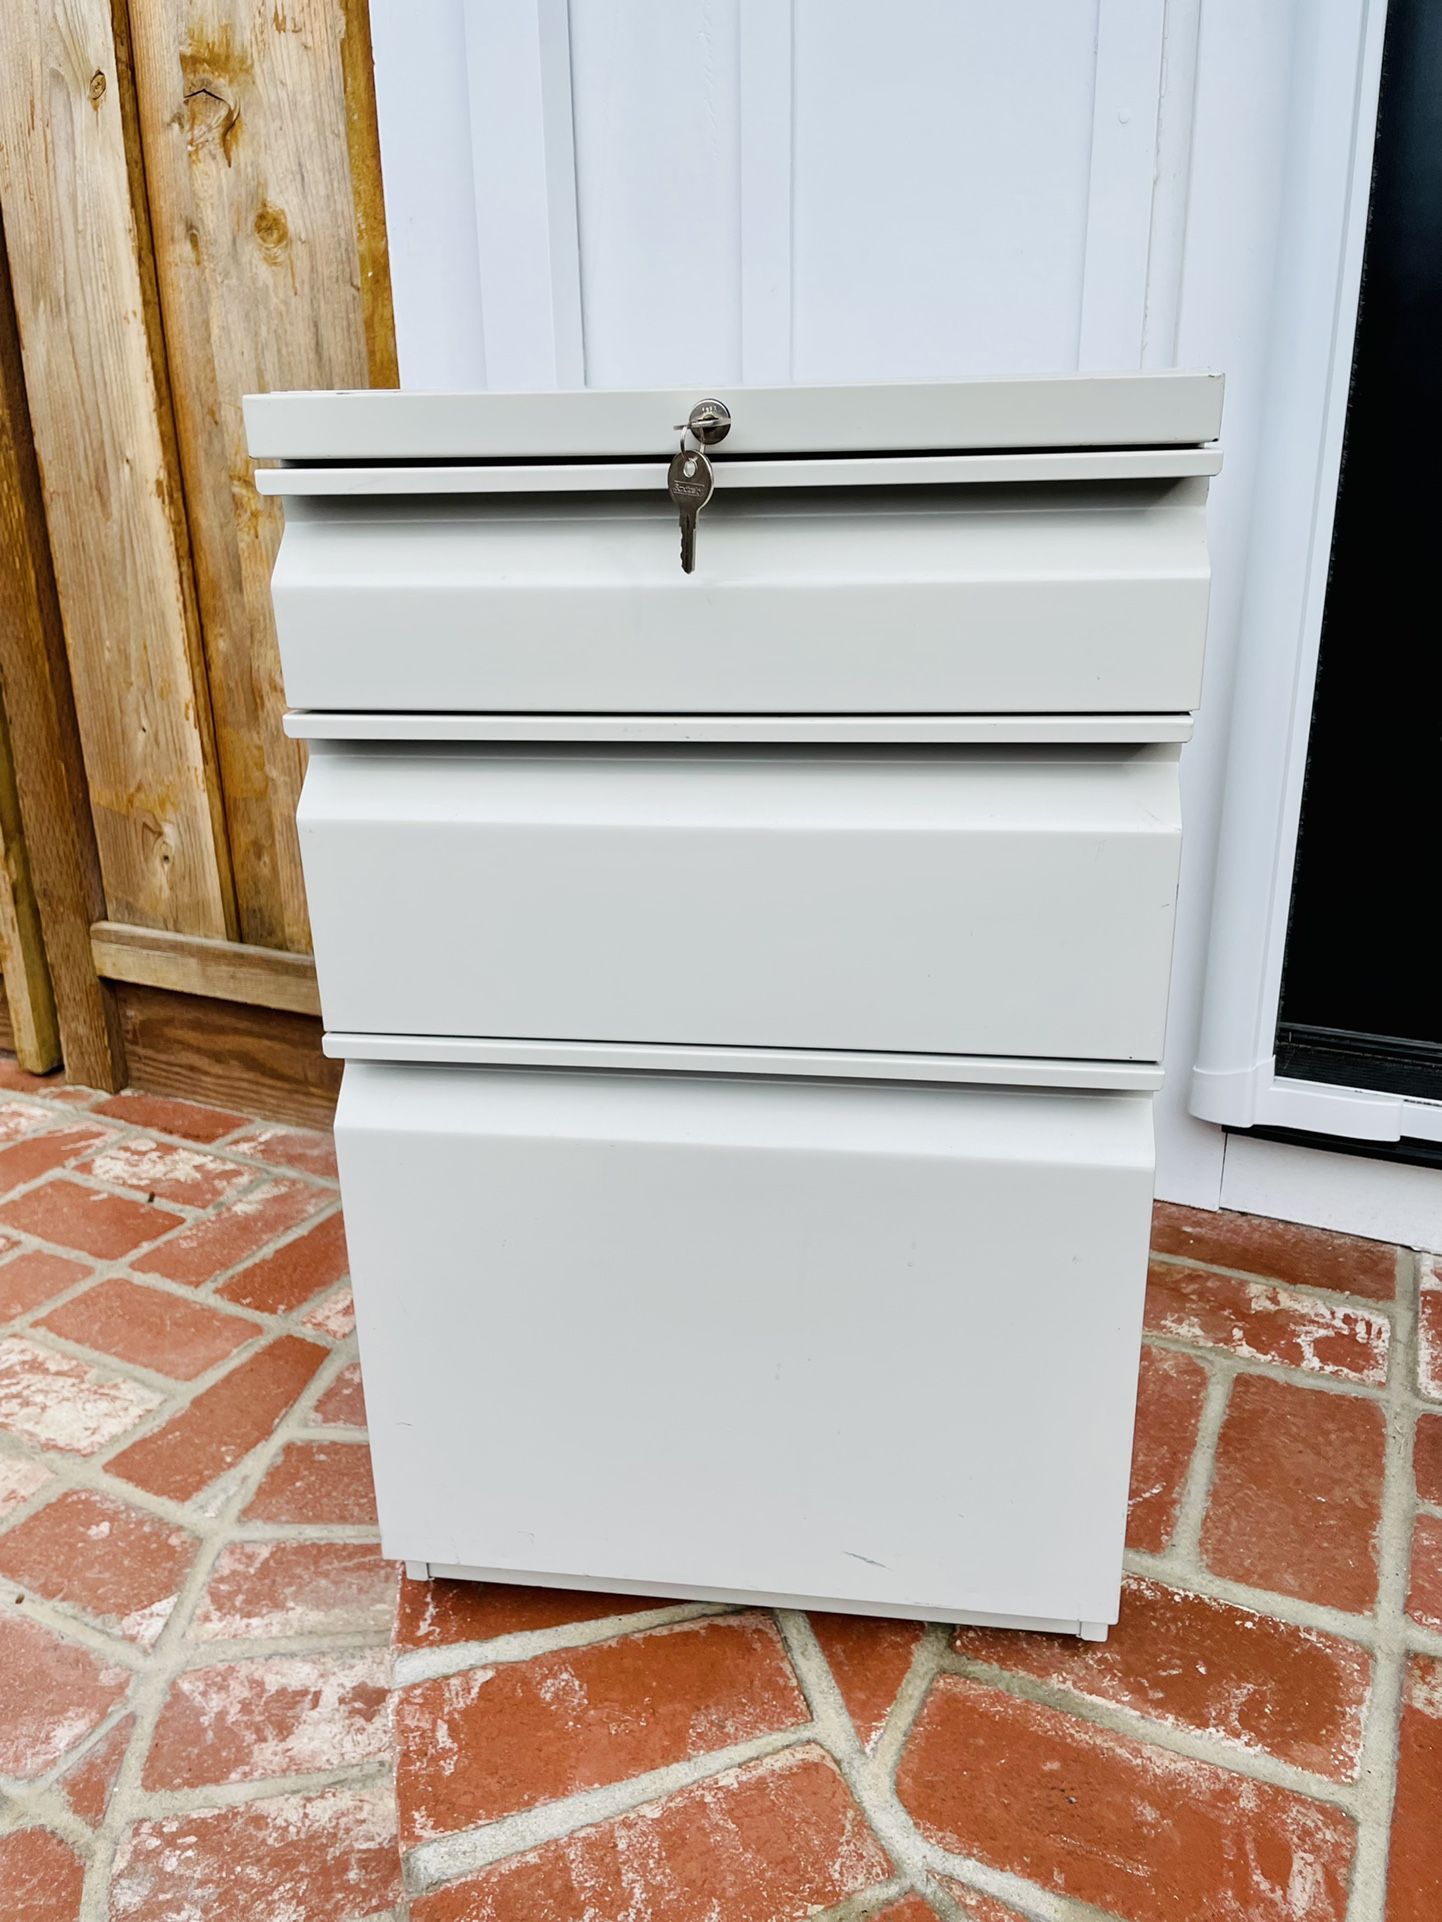 3 Drawer Metal Filing Cabinet With Lock And Wheels